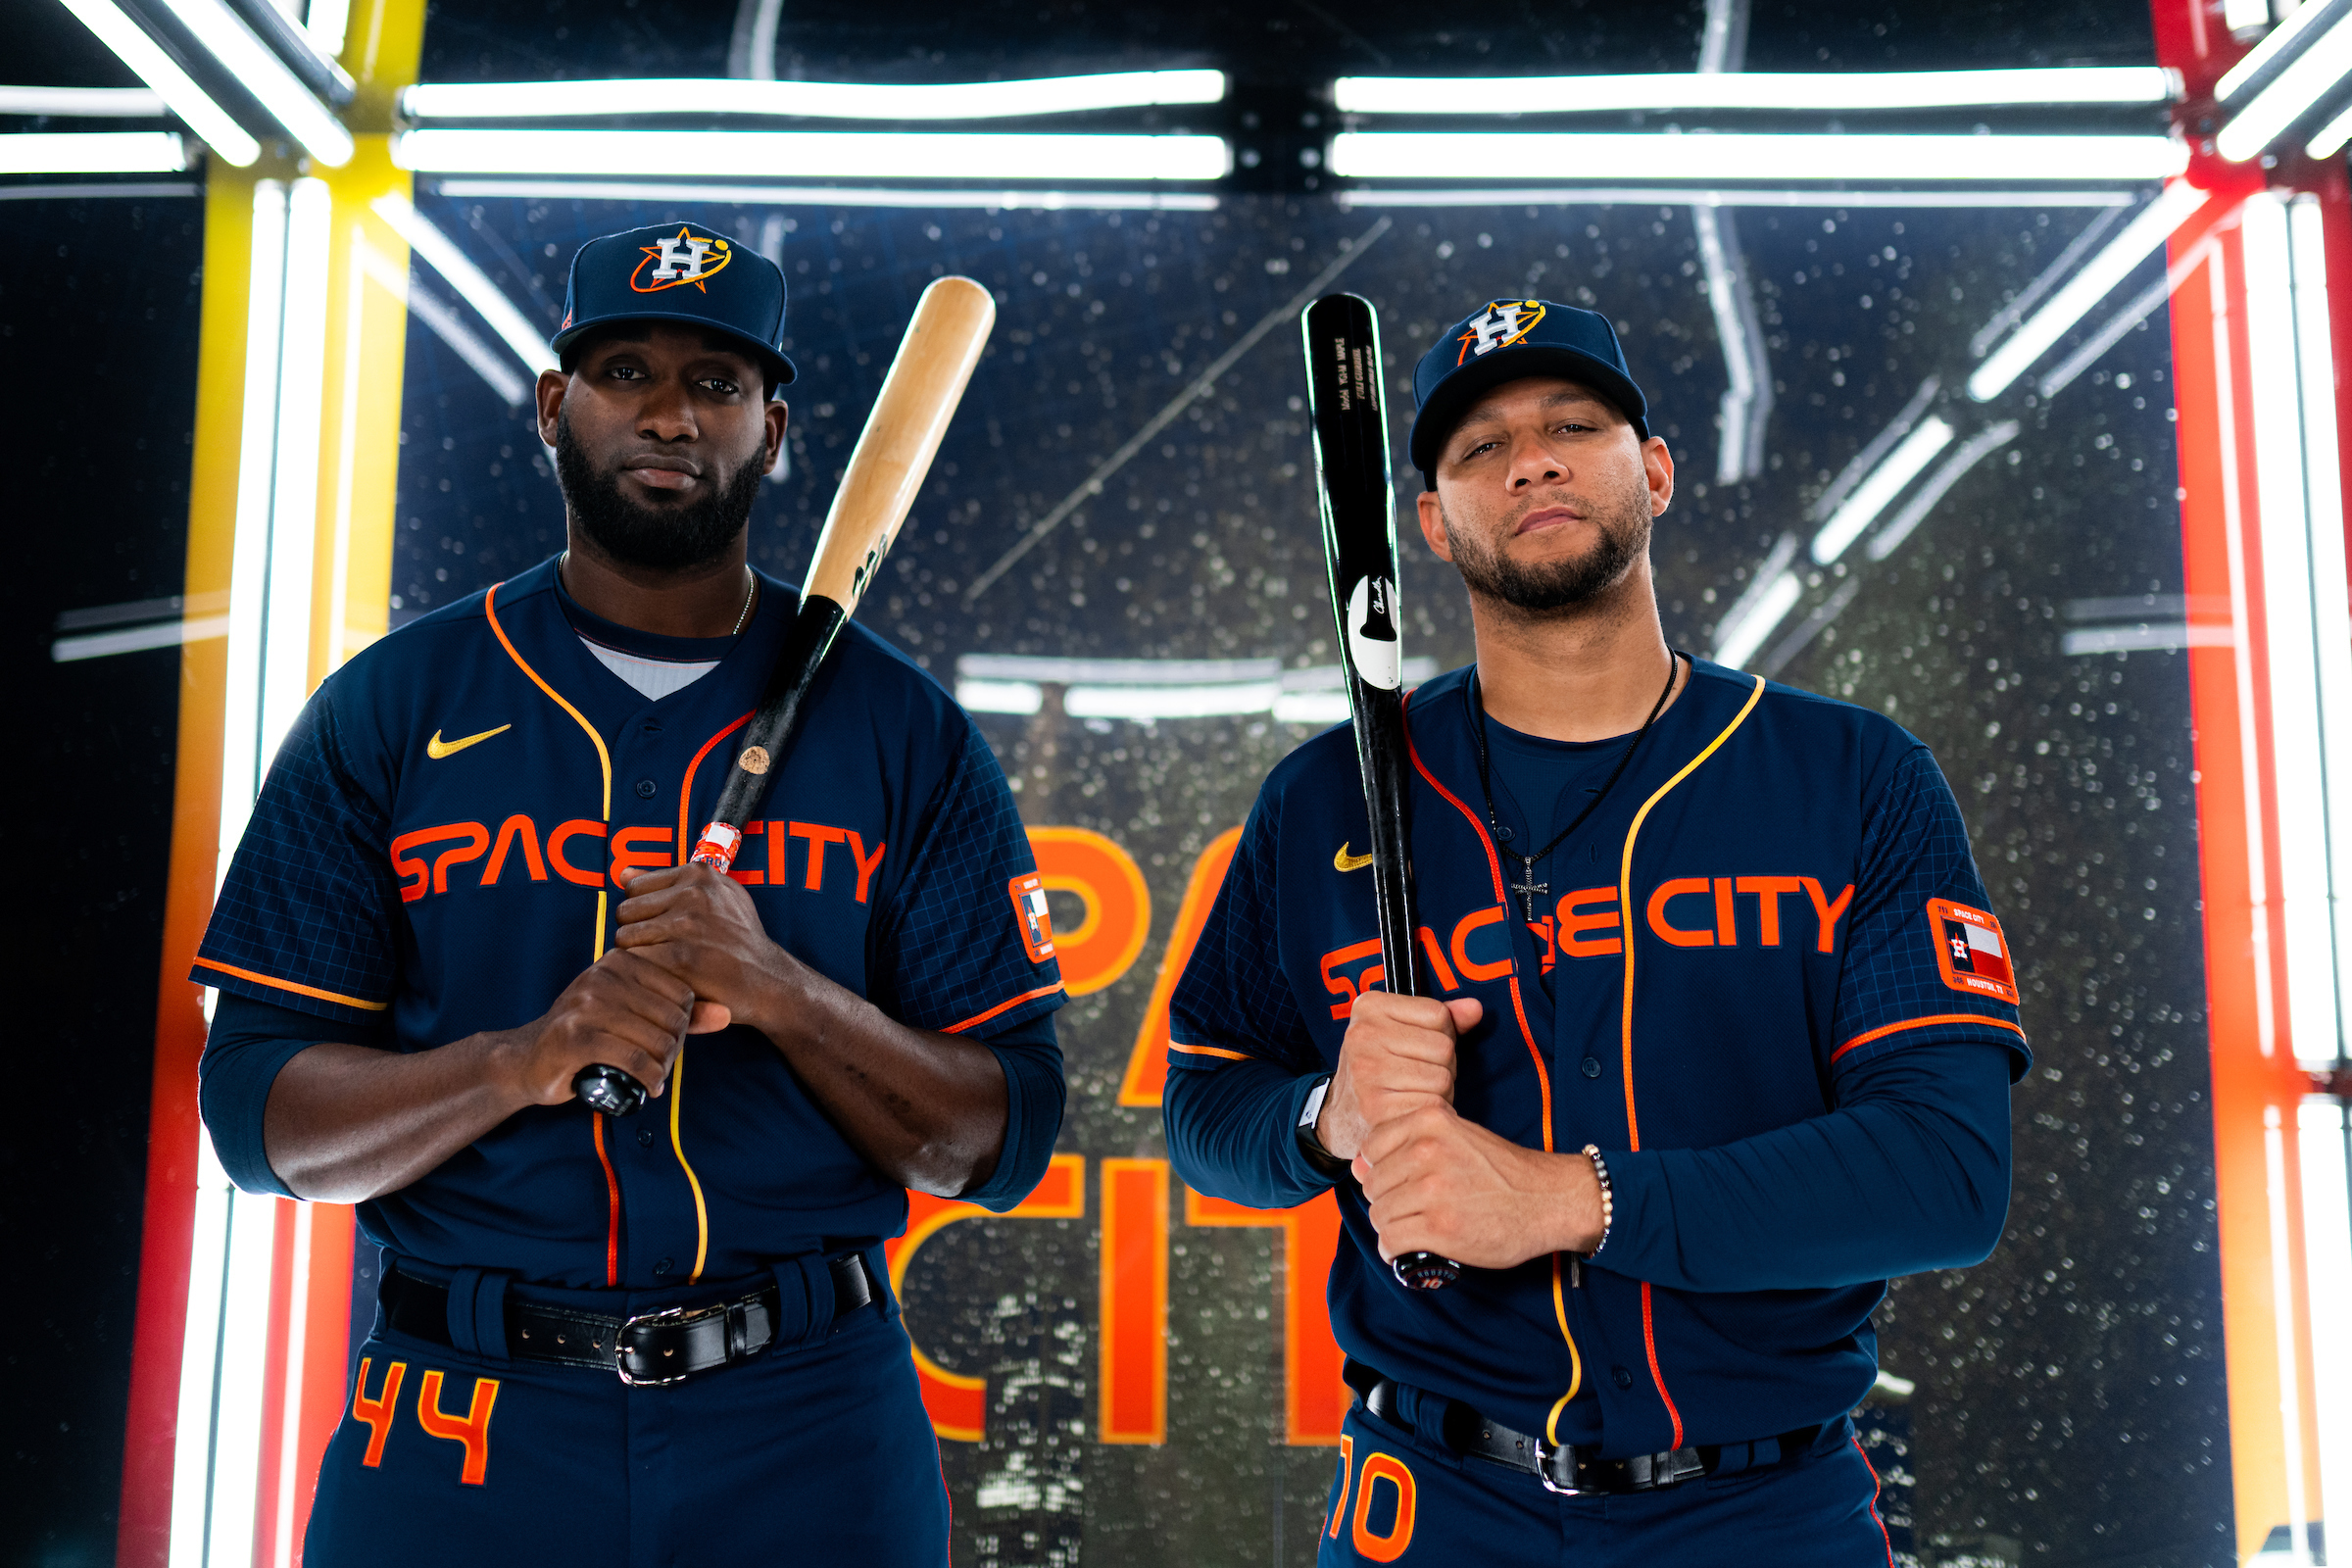 space city jersey world series